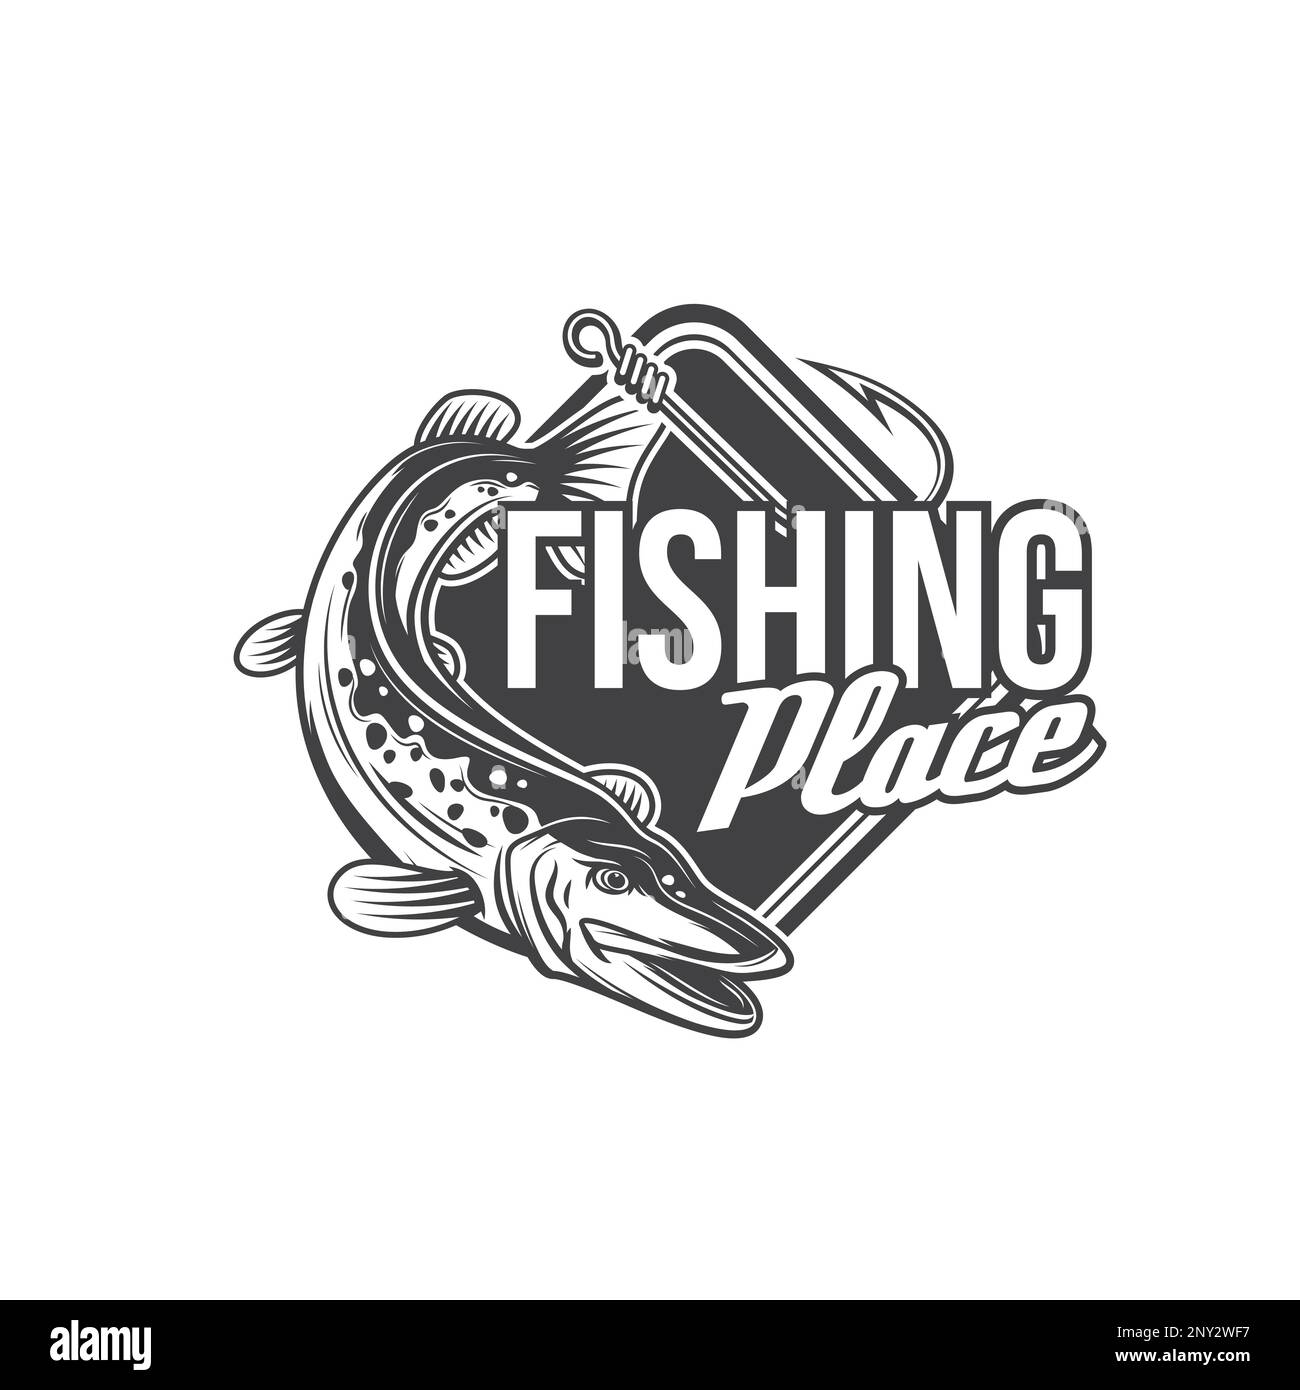 https://c8.alamy.com/comp/2NY2WF7/pike-fishing-icon-vector-fish-and-fisherman-tackle-hook-fishing-sport-equipment-and-angler-items-with-pike-or-predatory-freshwater-fish-isolated-badge-fisherman-club-emblem-or-outdoor-hobby-symbol-2NY2WF7.jpg